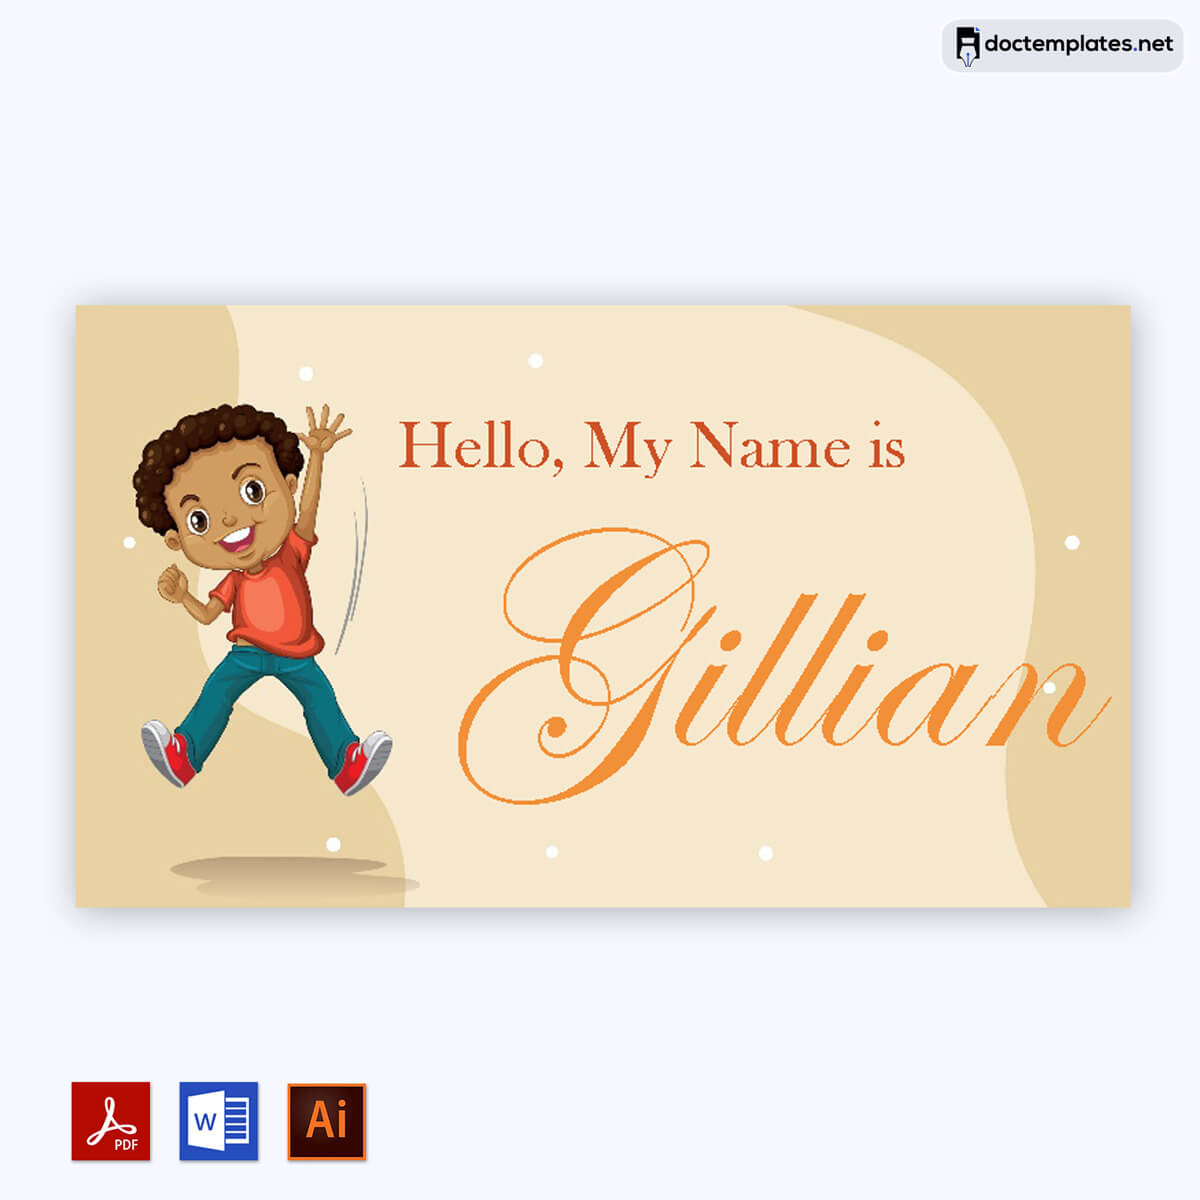 Image of Name template design
Name template design
01